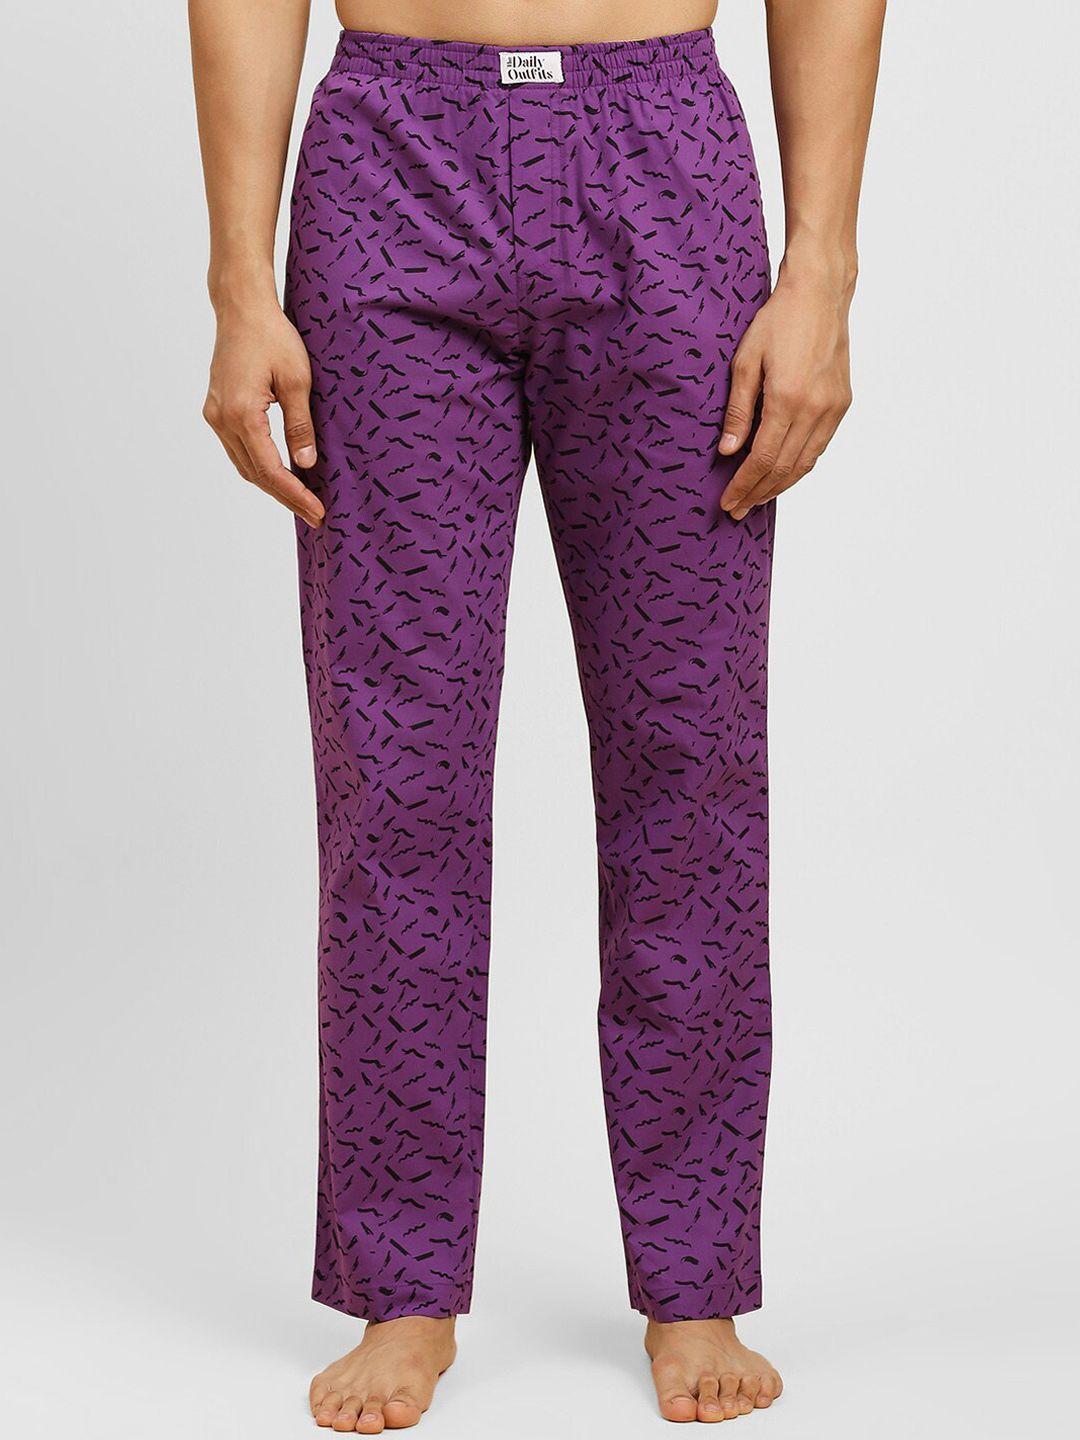 the daily outfits abstract printed cotton lounge pants